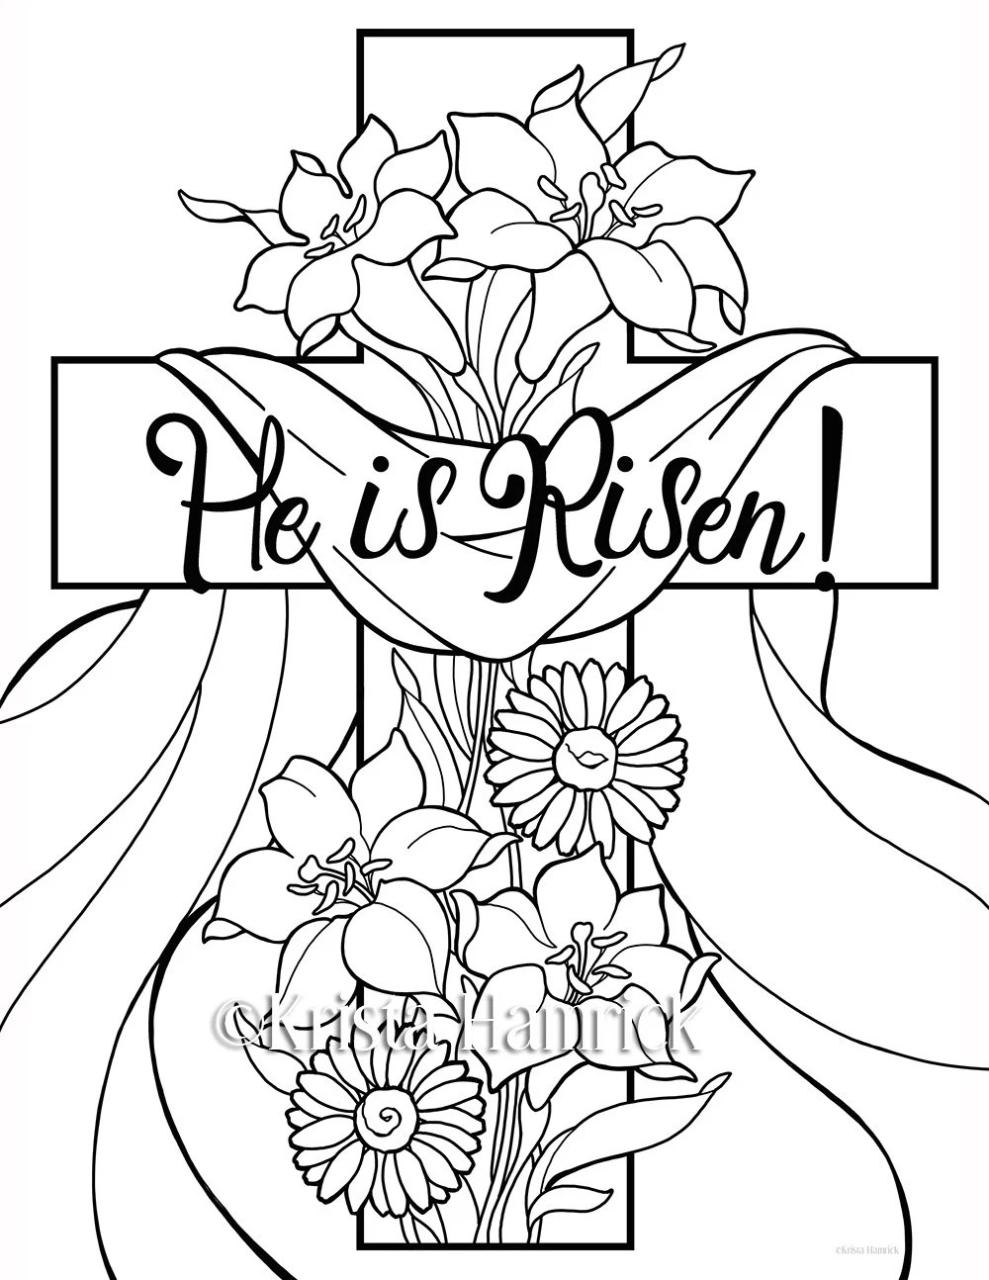 He is Risen 2 Easter coloring pages for children